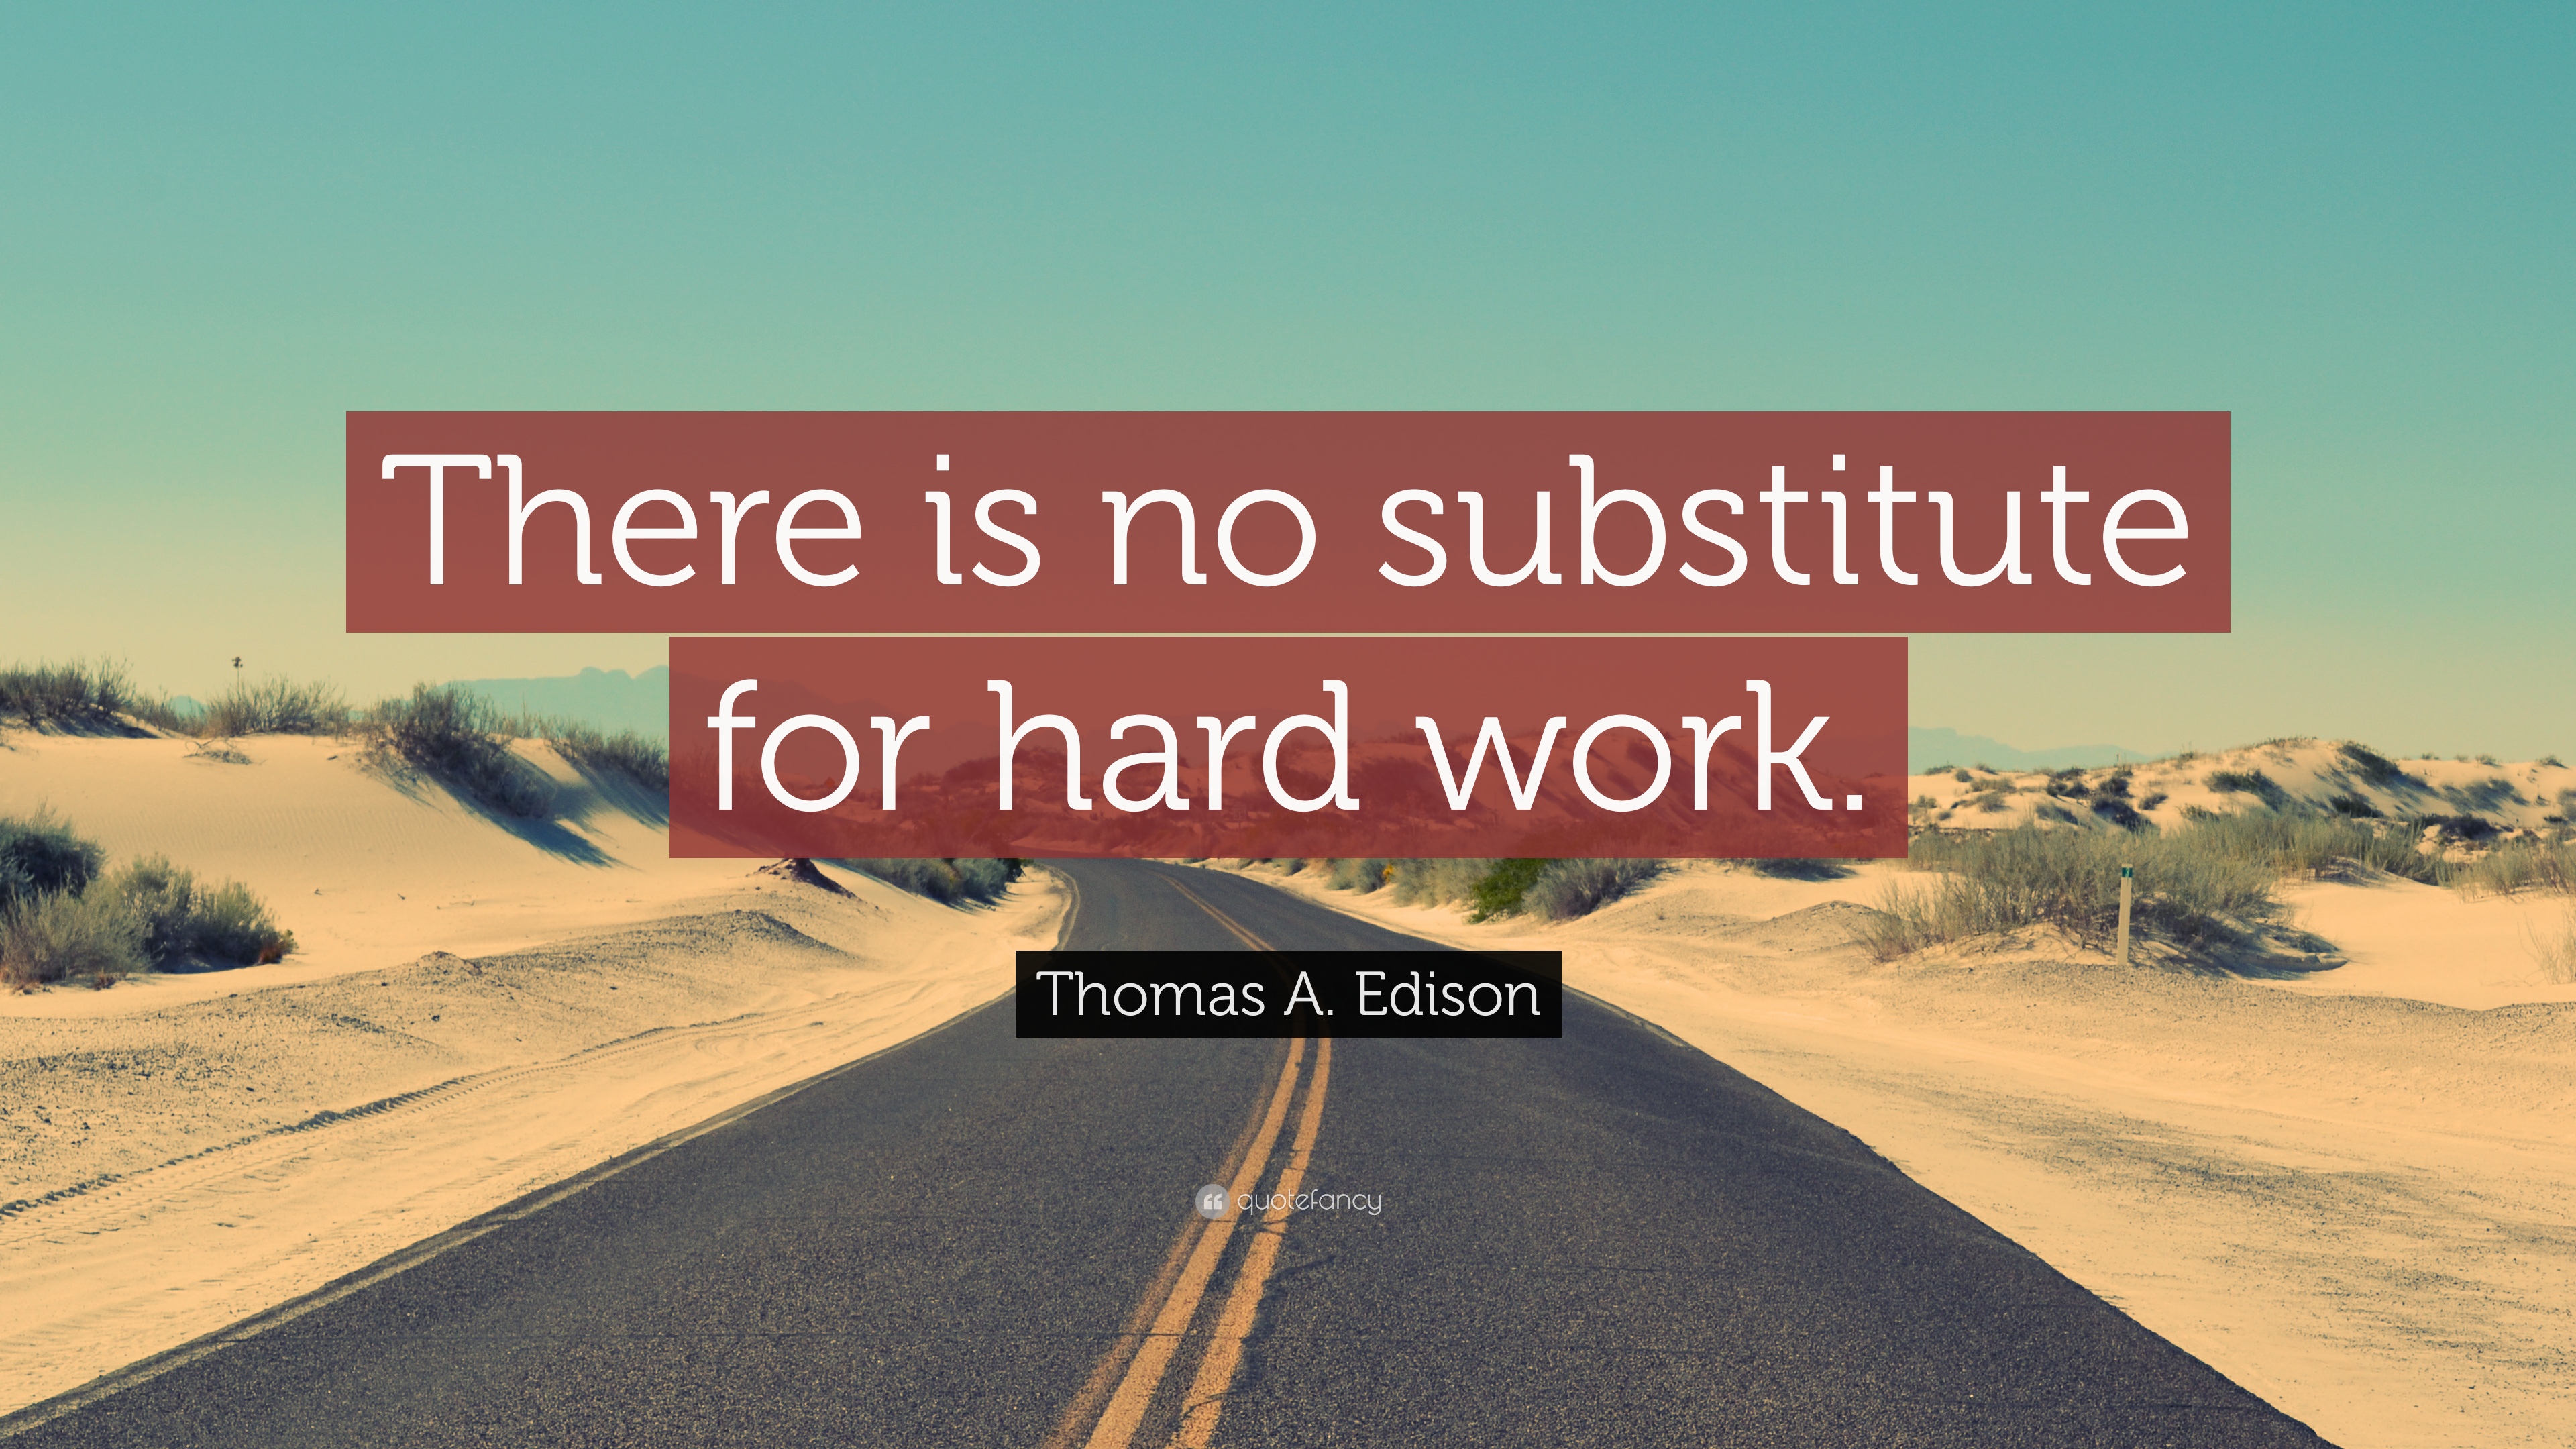 Thomas A. Edison Quote: “There is no substitute for hard work.”